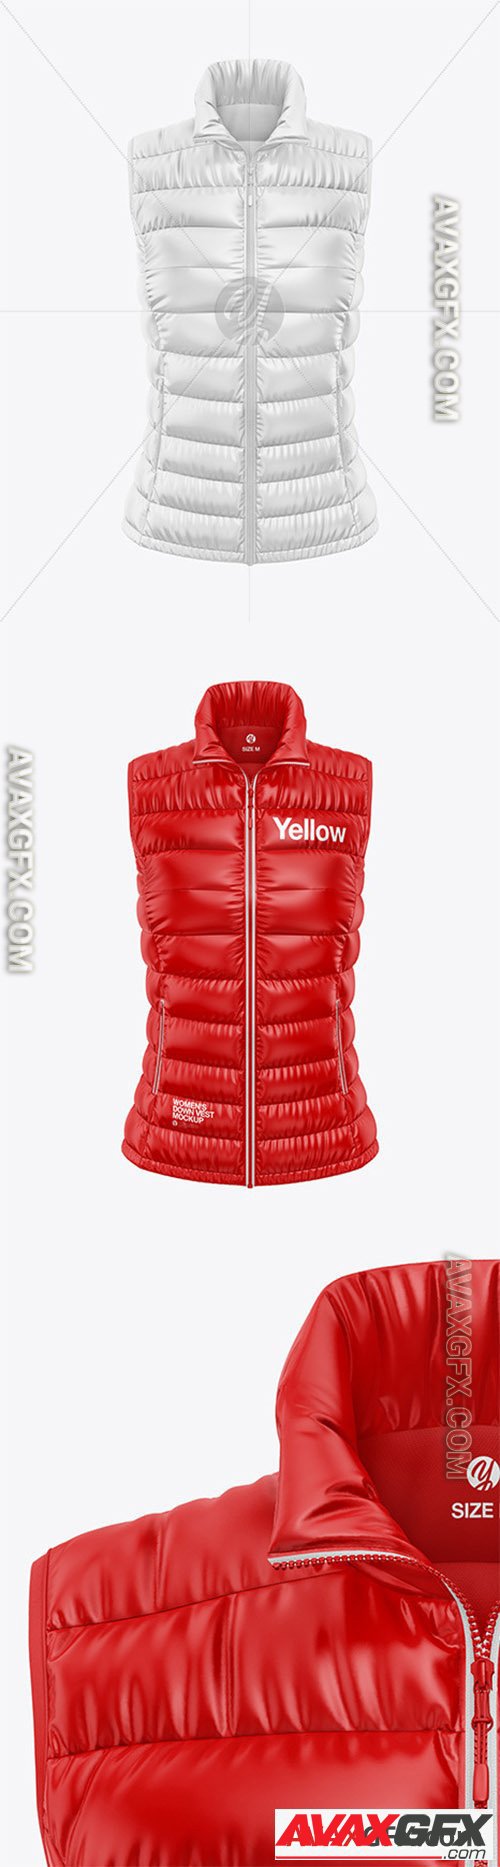 Glossy Womens Down Vest Mockup - Front View 52147